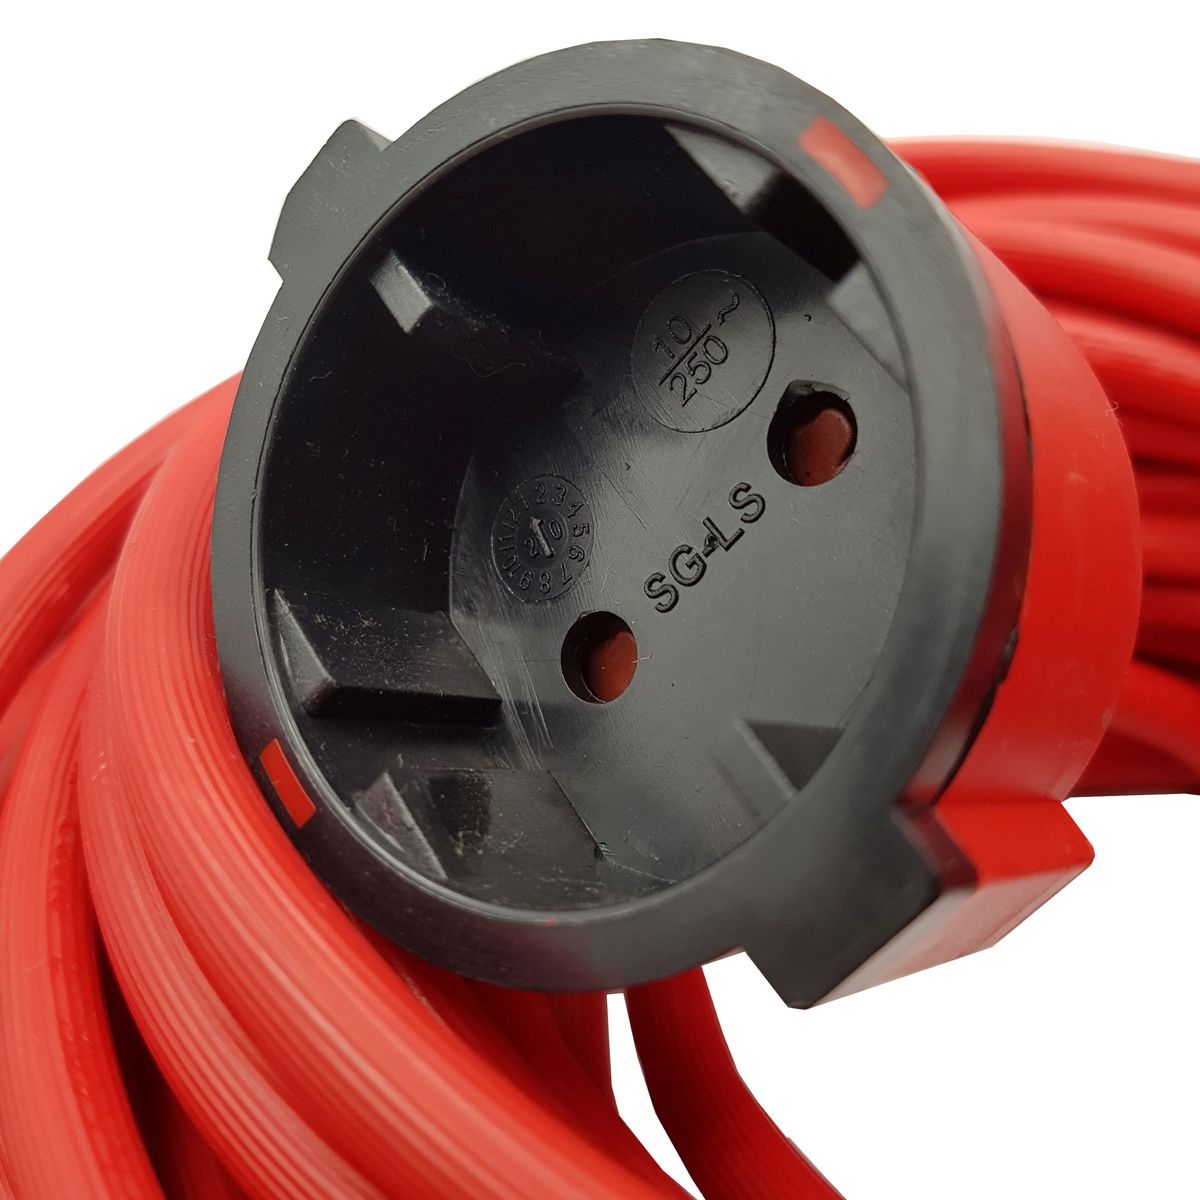 20m x 1.0mm Extention Cord / Lead/ Cable Red